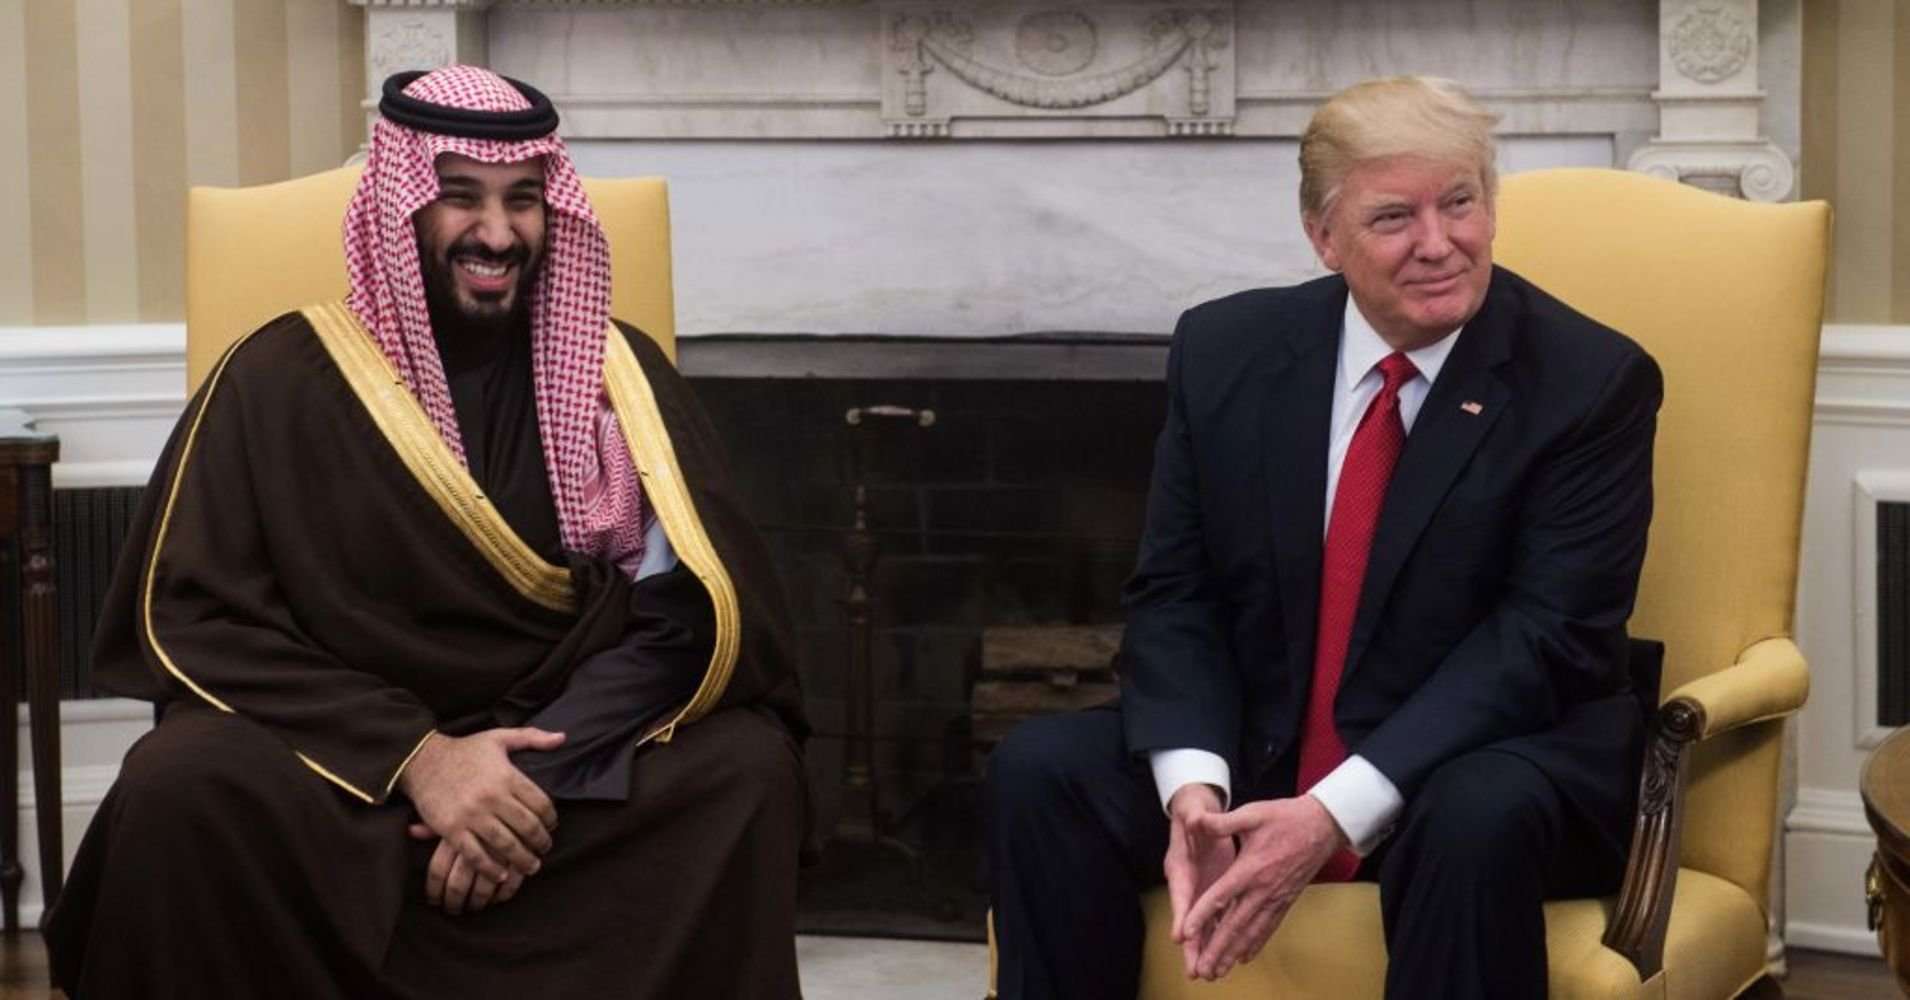 image for Trump claims he has 'no financial interests in Saudi Arabia' — but he makes lots of money from it